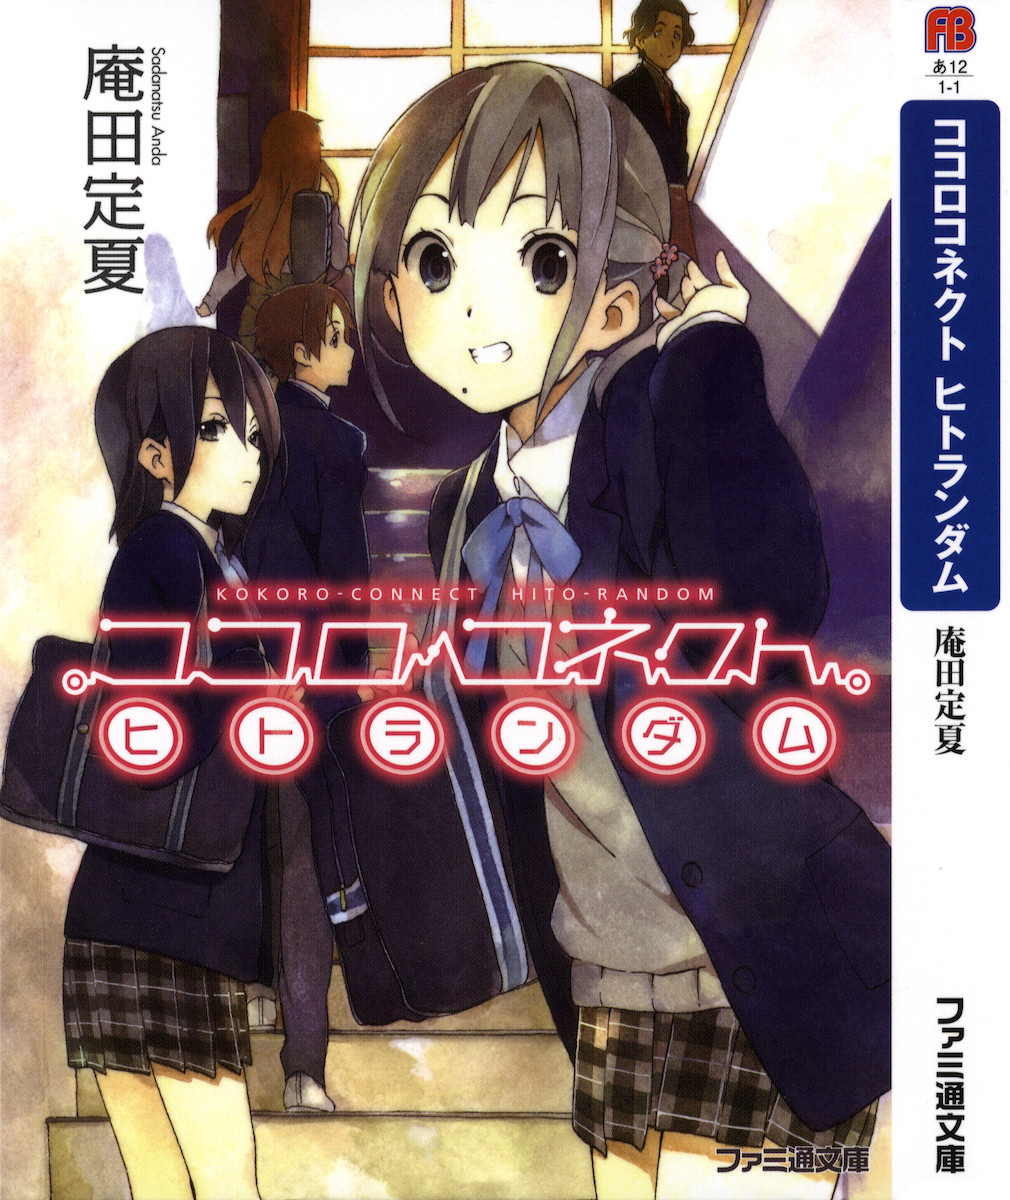 Kokoro Connect as an unfinished transhumanist masterpiece, by heke